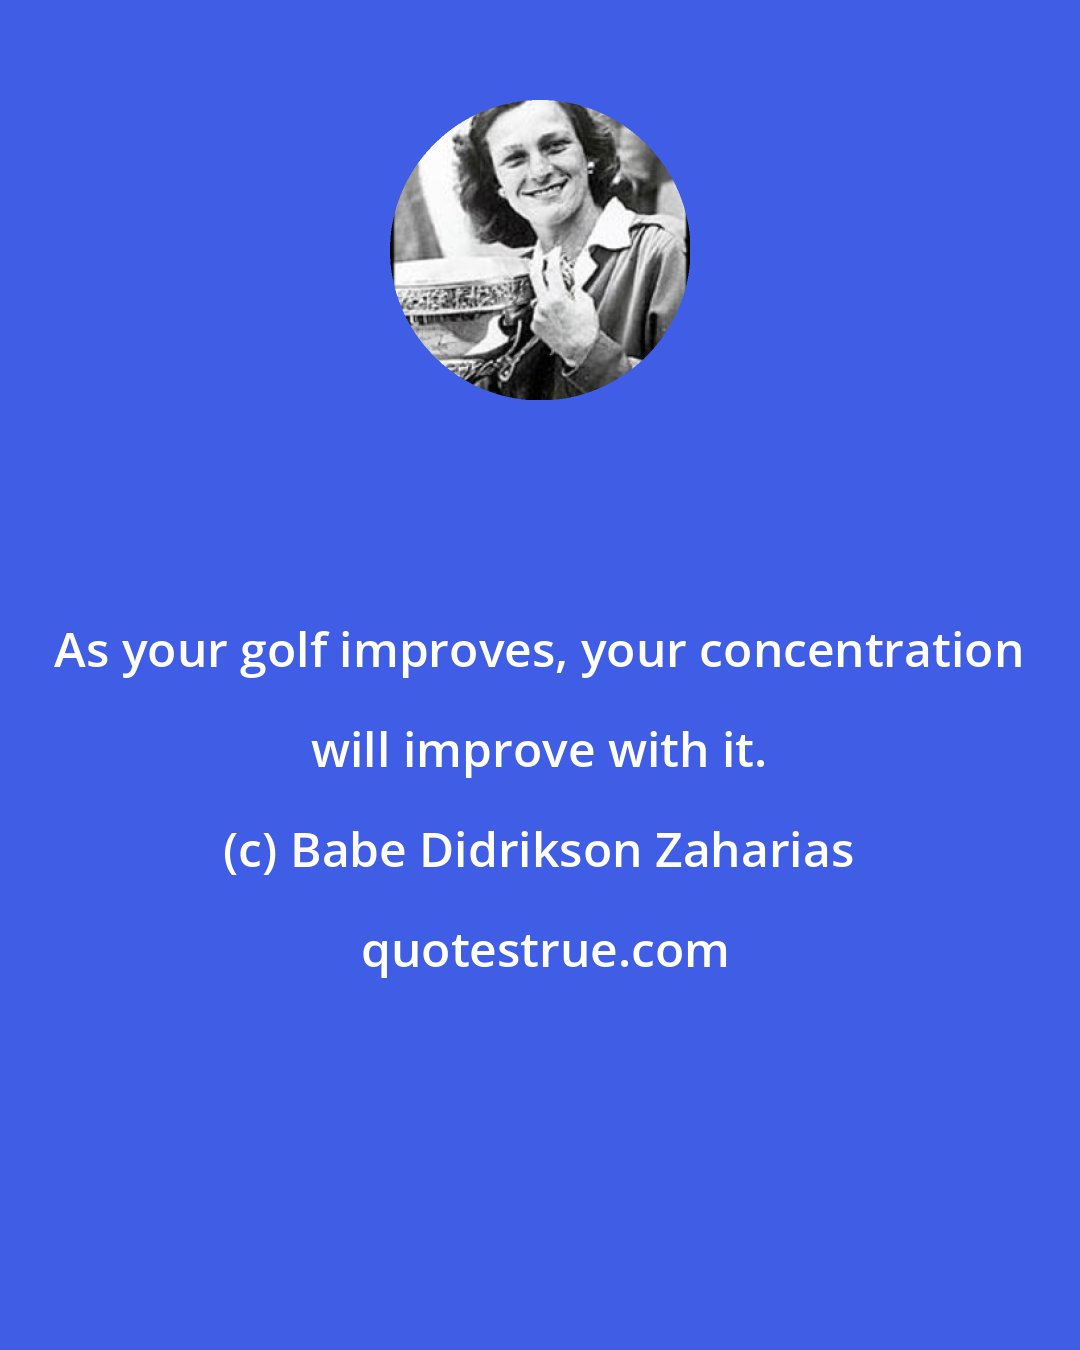 Babe Didrikson Zaharias: As your golf improves, your concentration will improve with it.